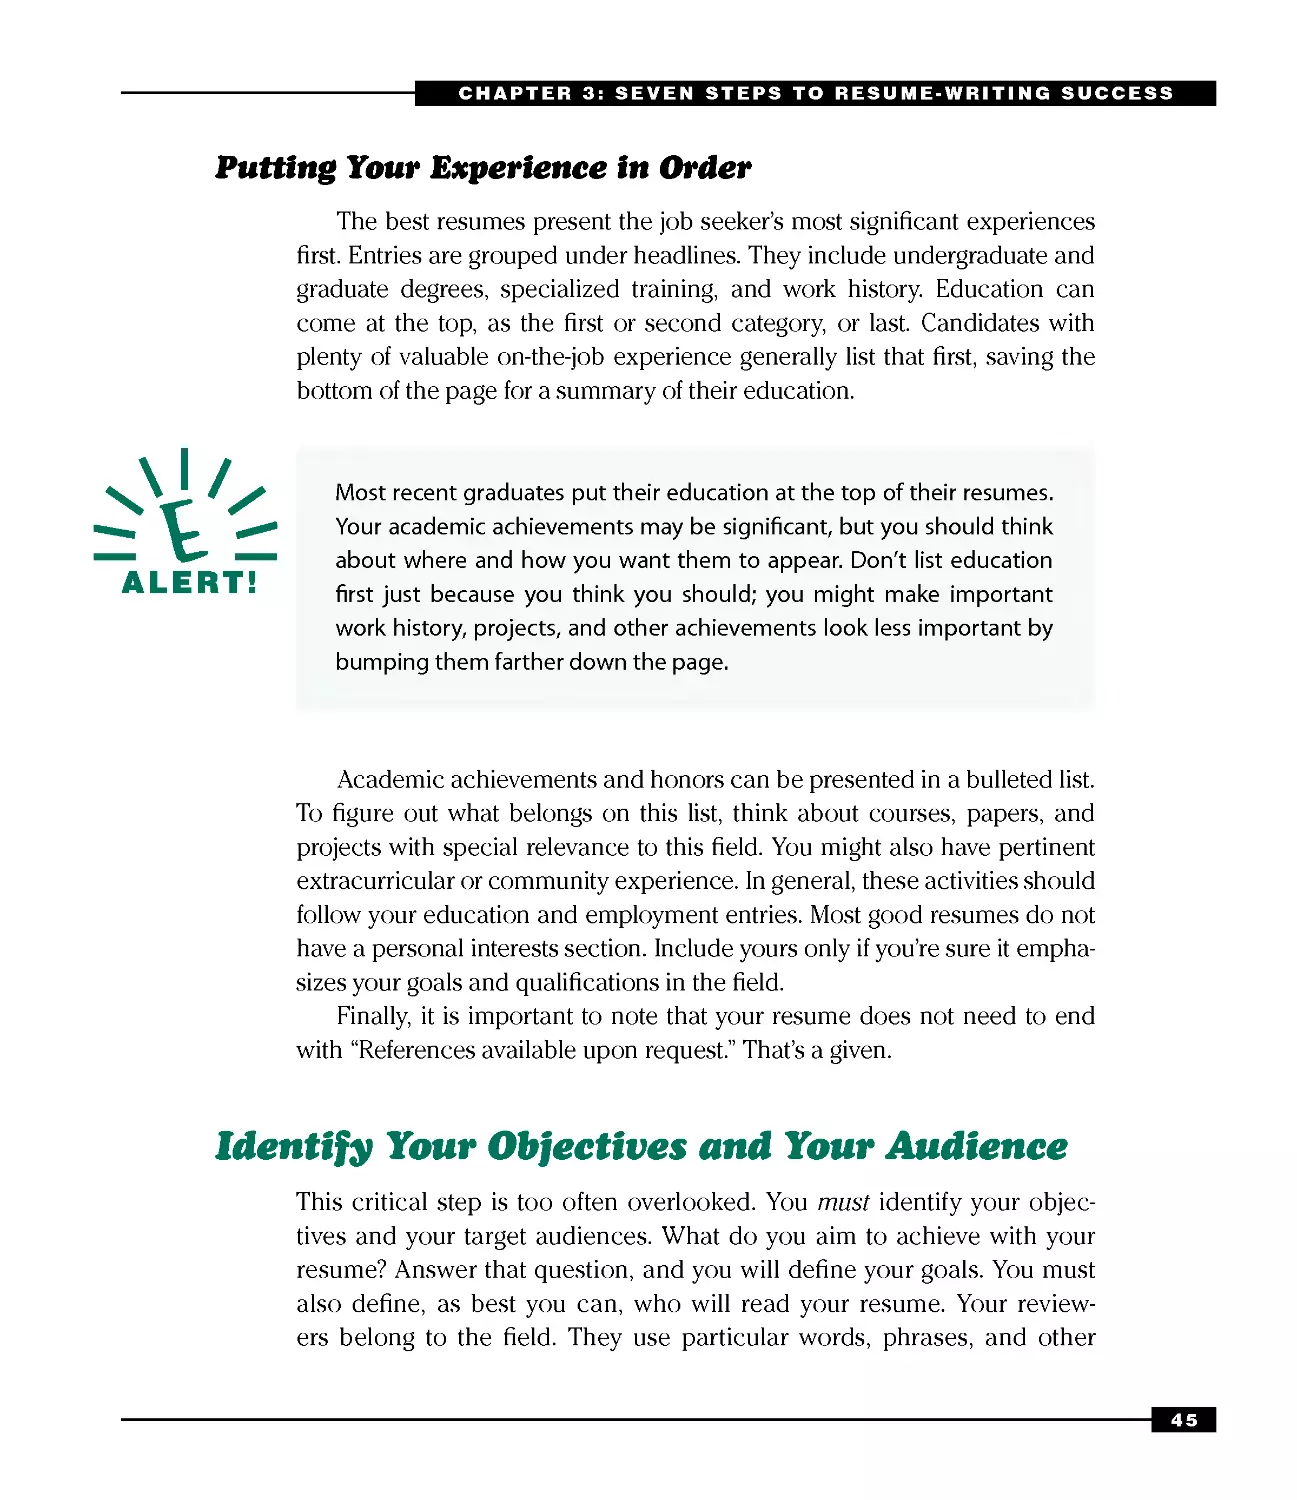 Identify Your Objectives and Your Audience